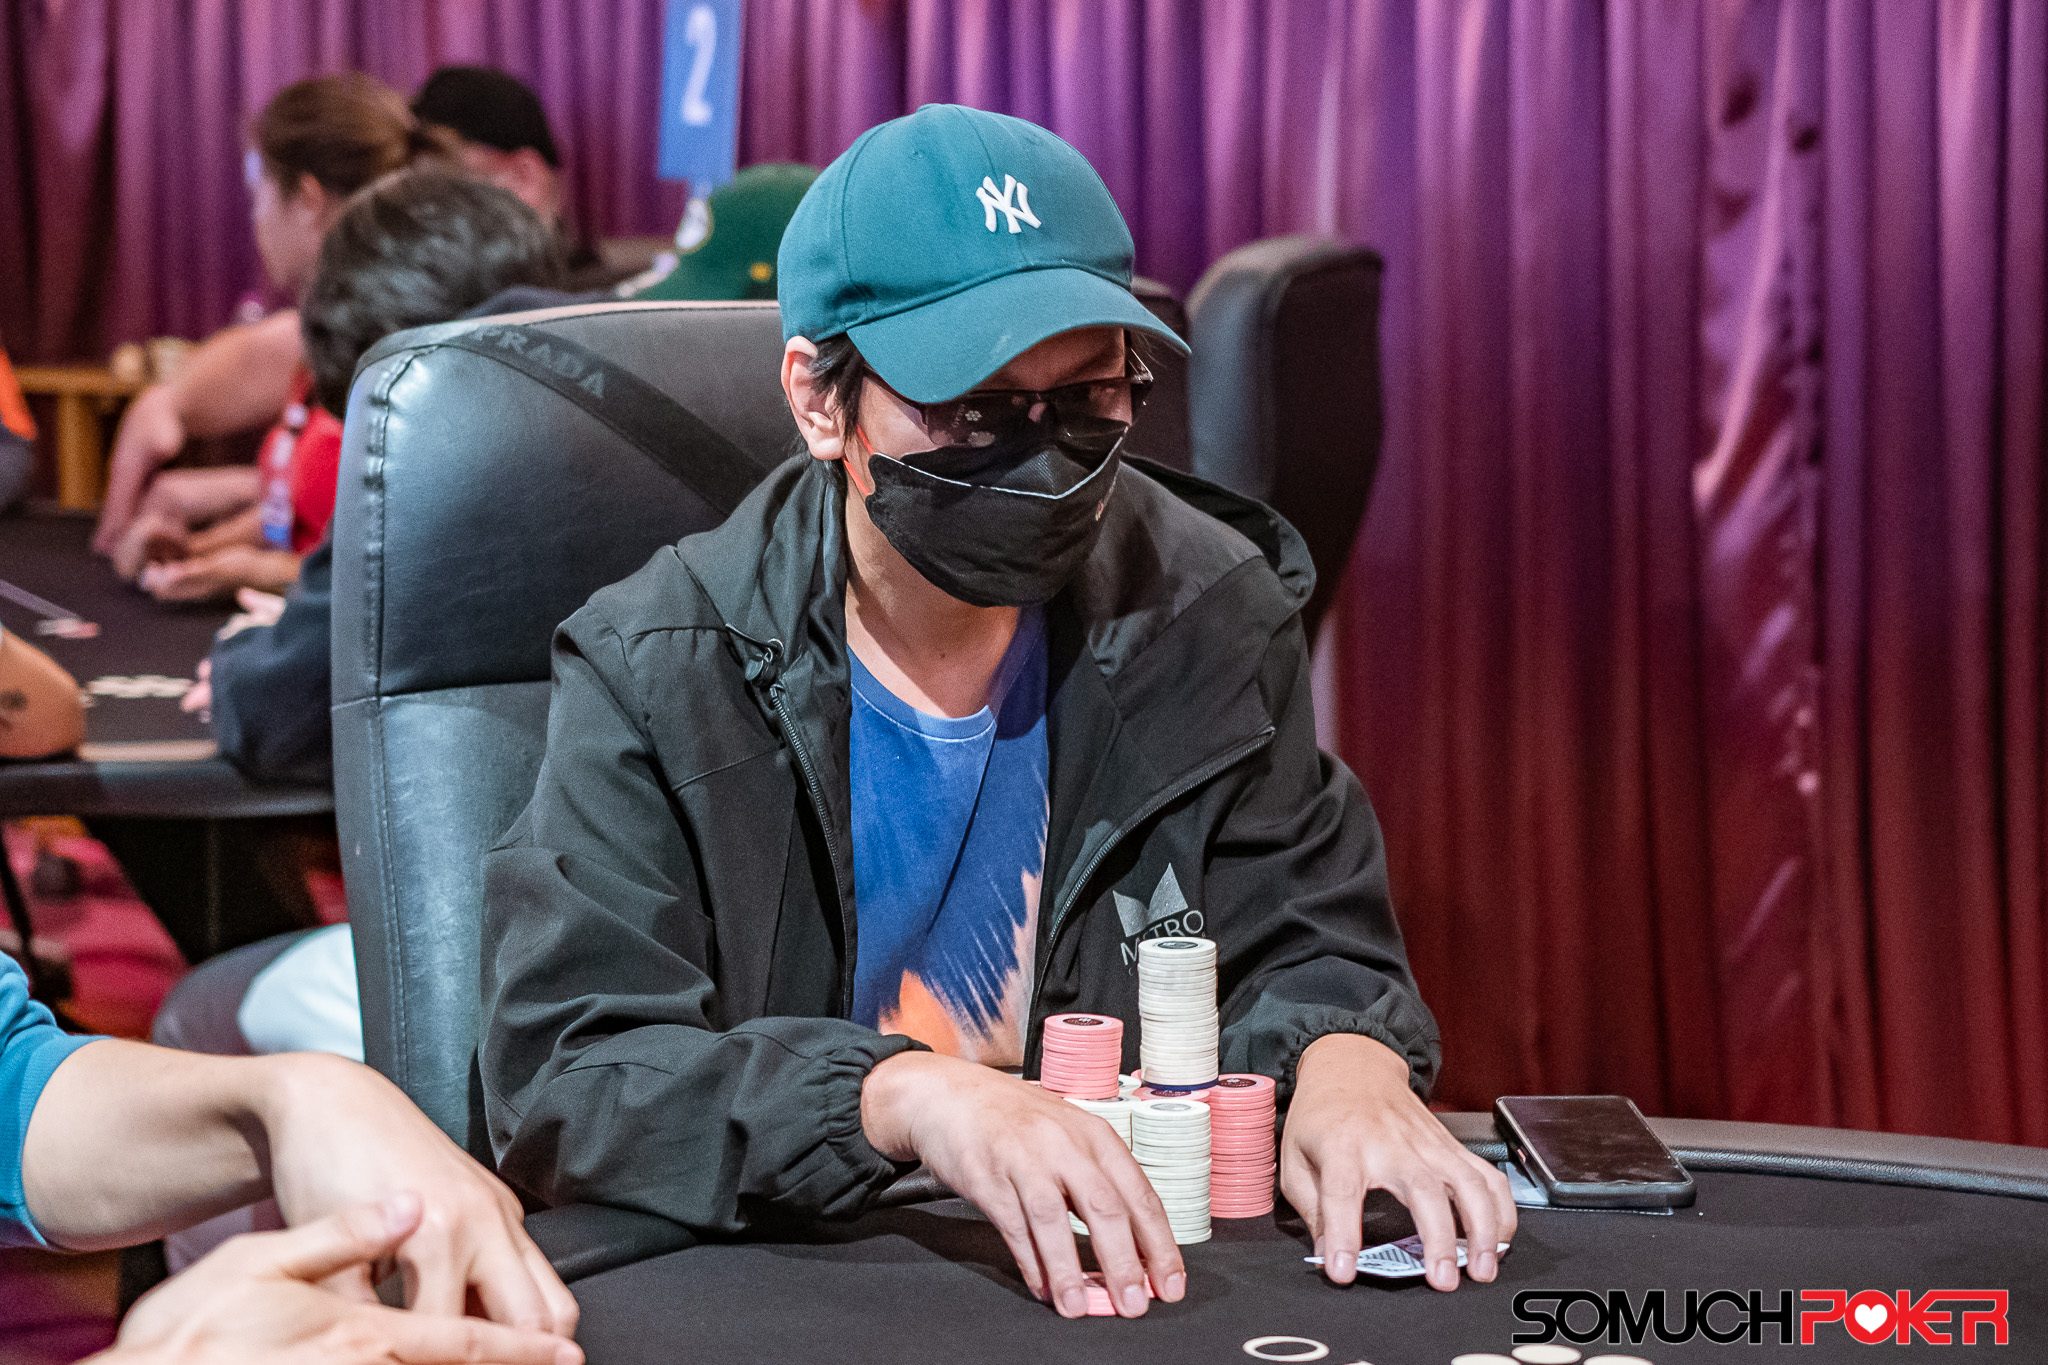 APPT Manila to crown Kick-Off champion; Rommel Angeles leads; APPT National PHP 5M gtd starts today; Xu Qiang wins NLH Freezeout